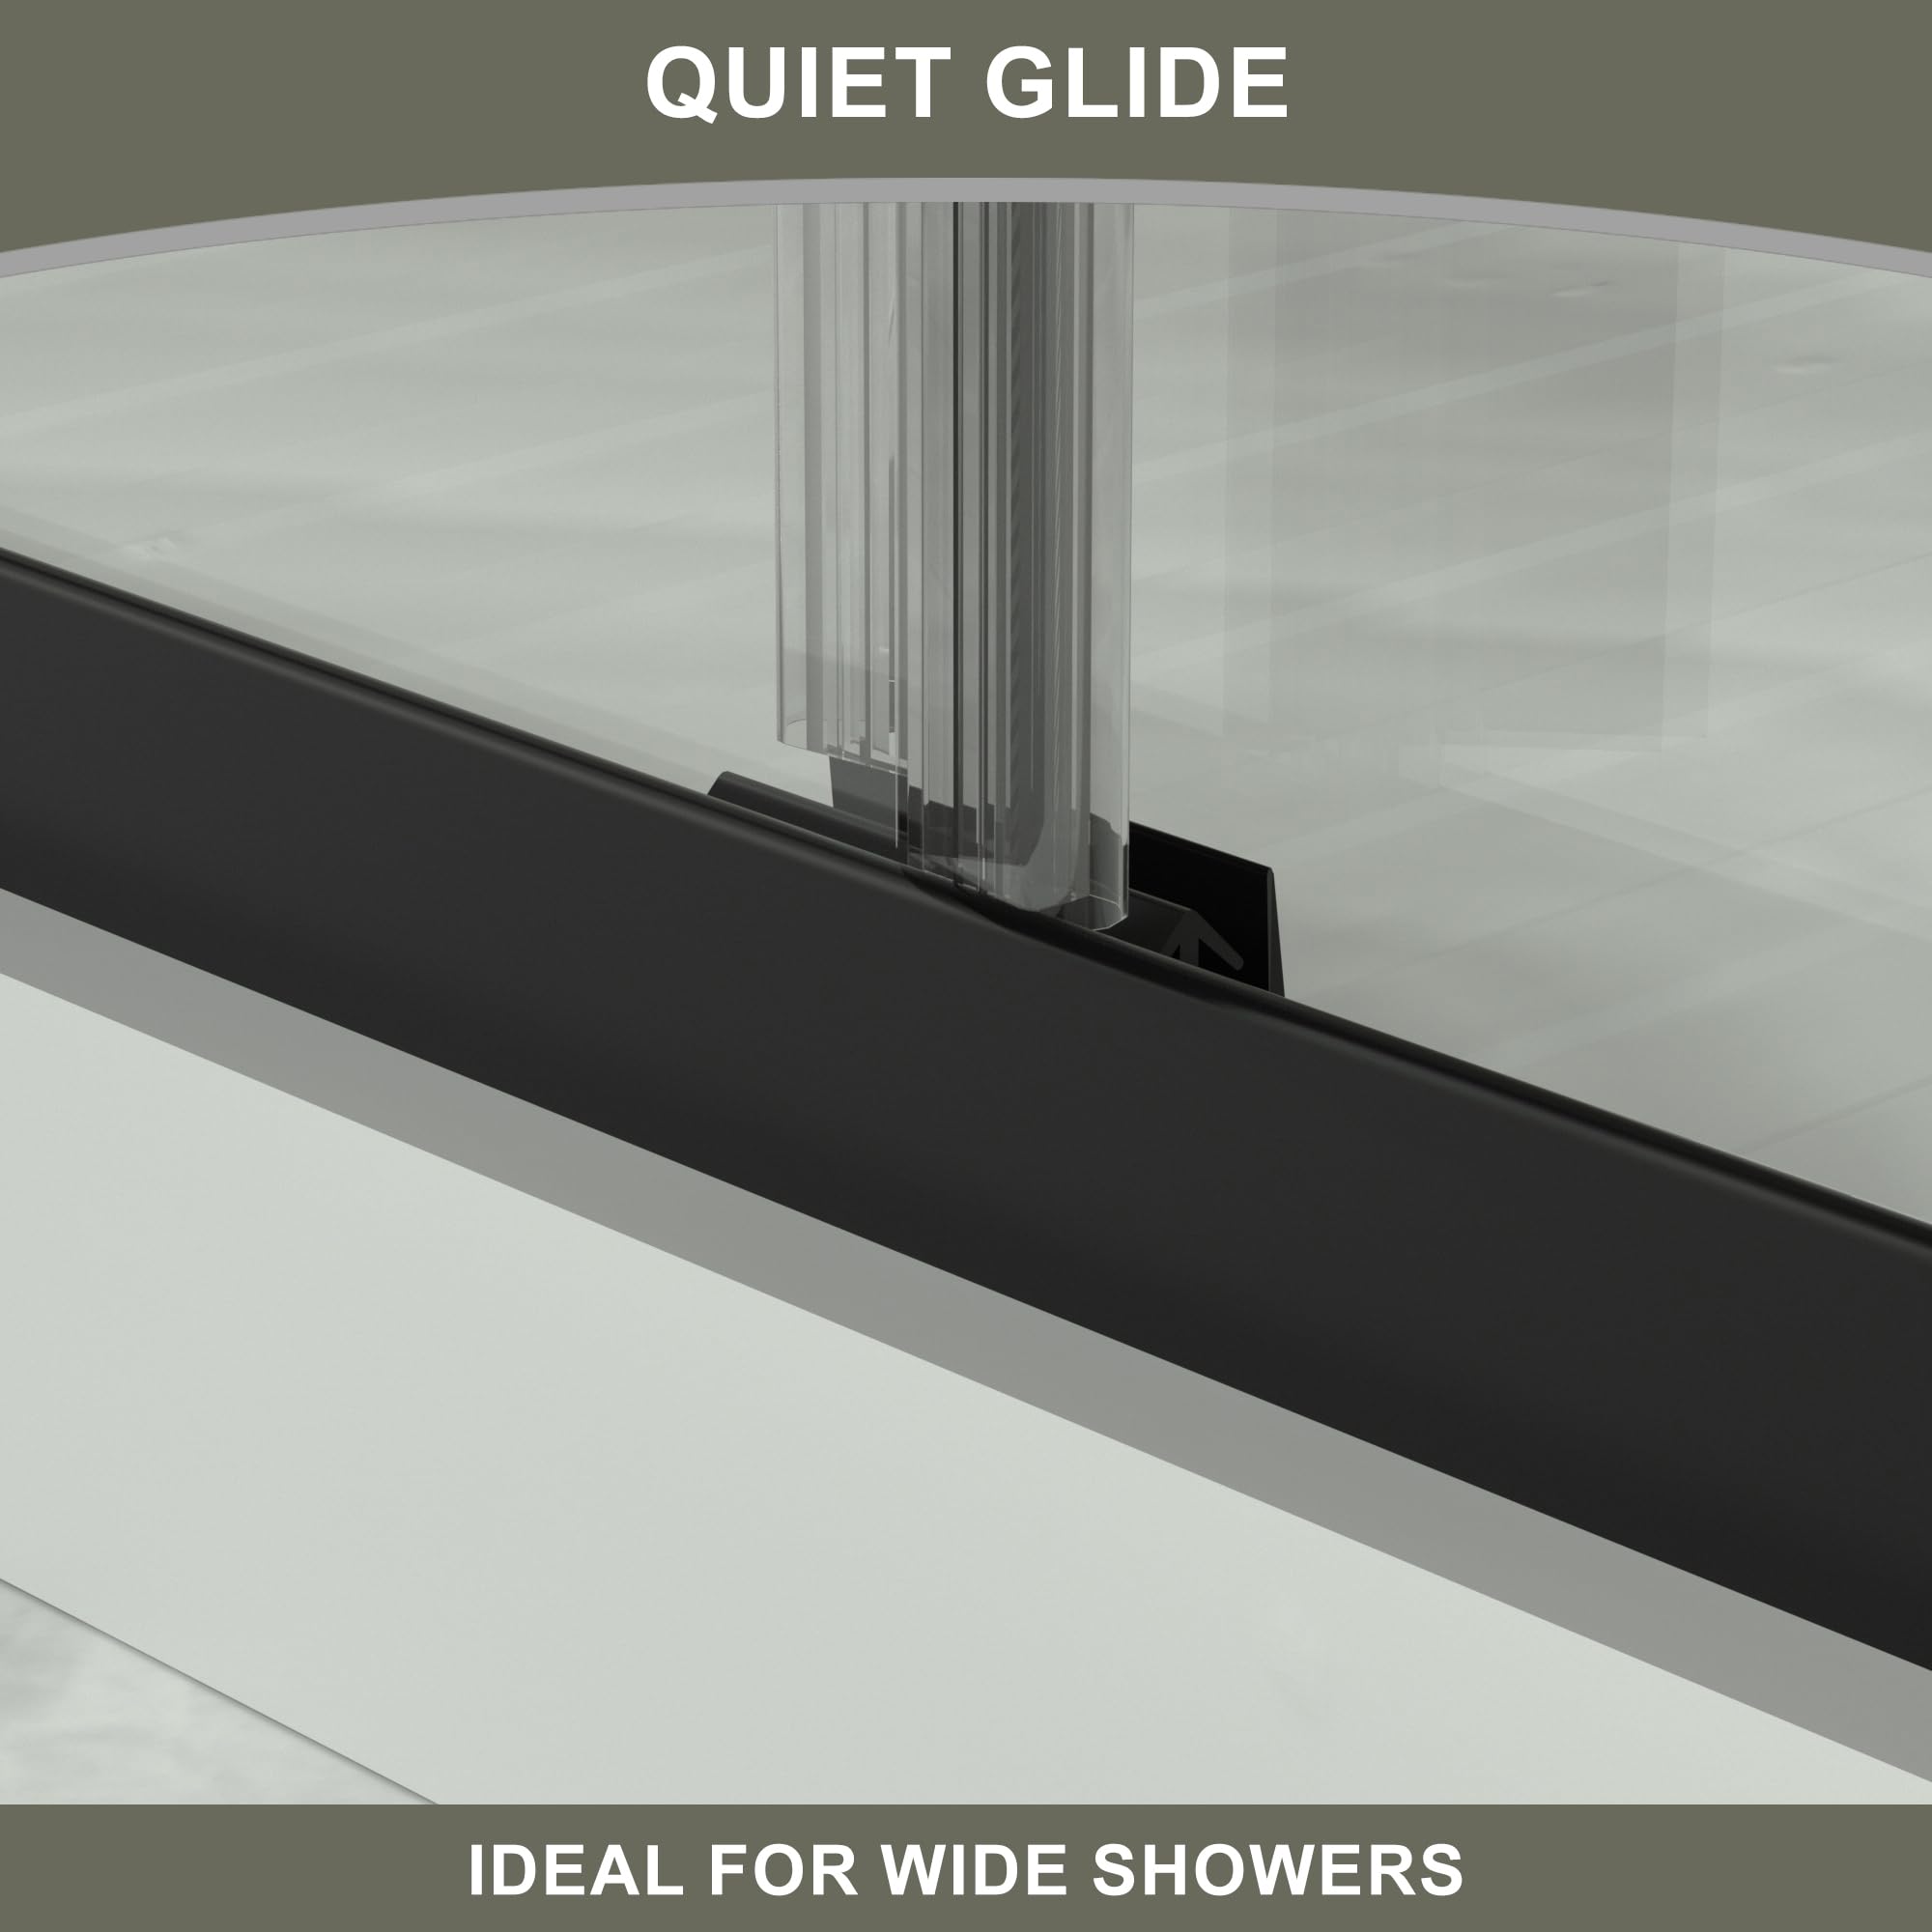 Gxcevsou 44-48" W x 72" H Semi-Frameless Sliding Shower Door, Glass Shower Door with 1/4'' (6mm) Clear SGCC Tempered Glass, Matte Black Finish, Shower Doors can be Installed Left and Right